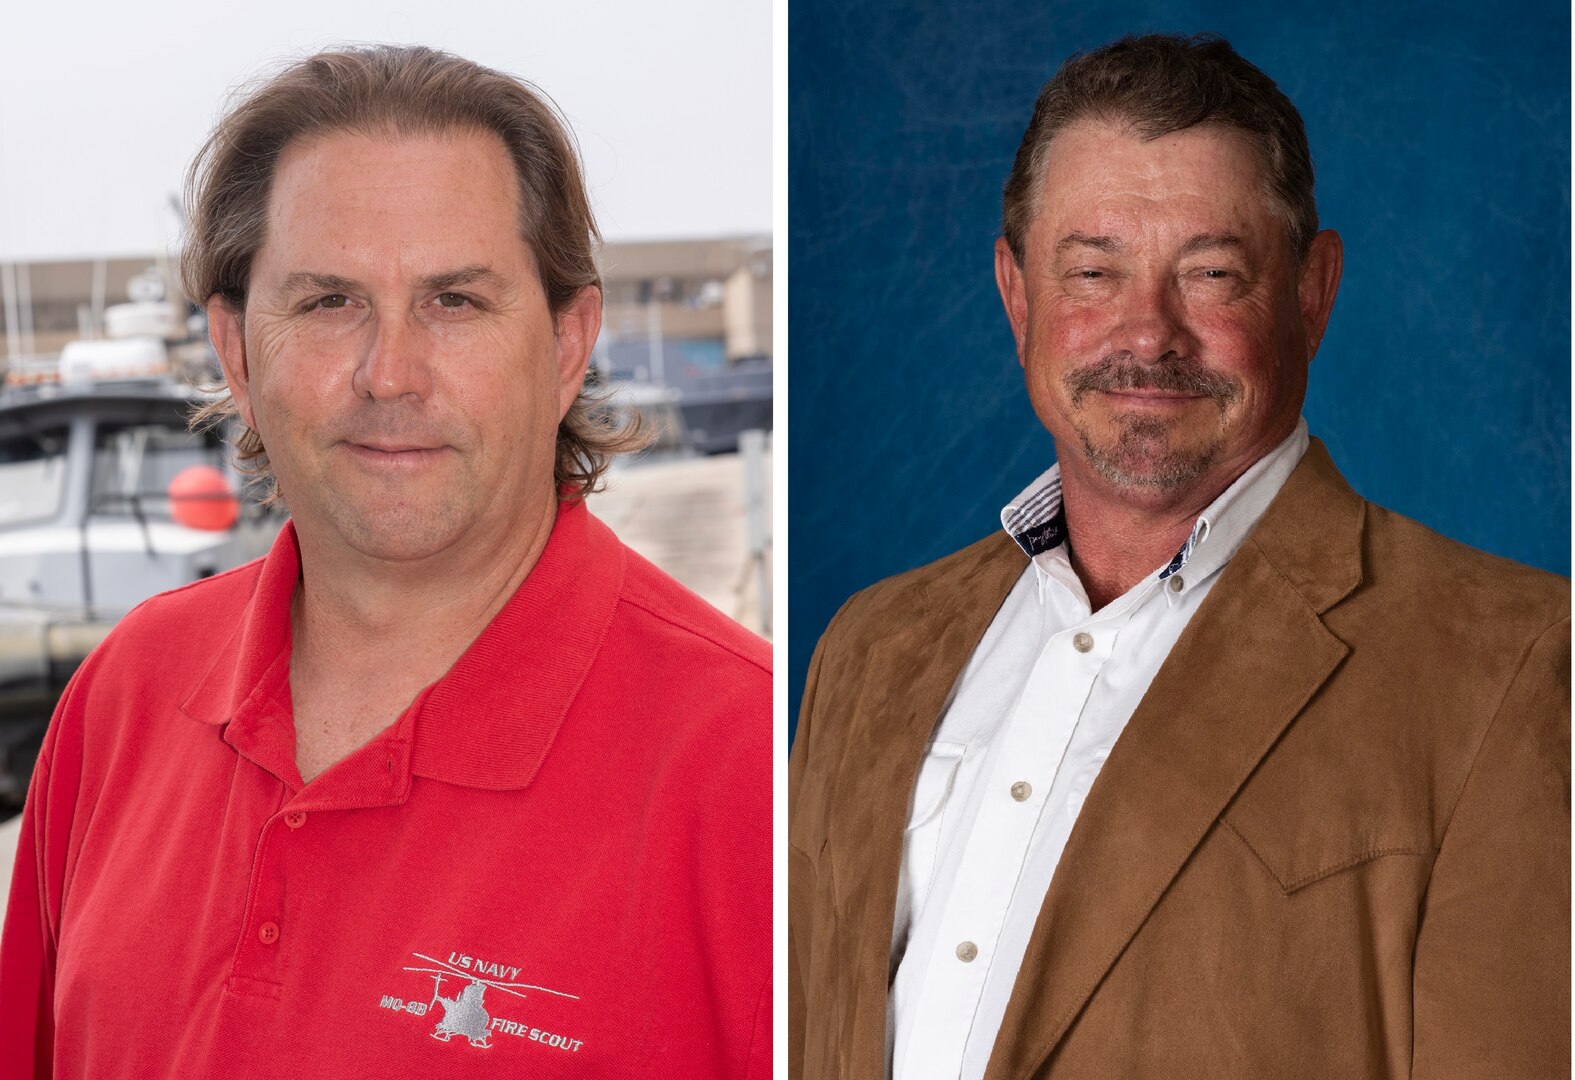 Darryl Ogden (left) and Randy Hetzel (right) were recently selected as Naval Sea Systems Command (NAVSEA) Testers in the Spotlight.